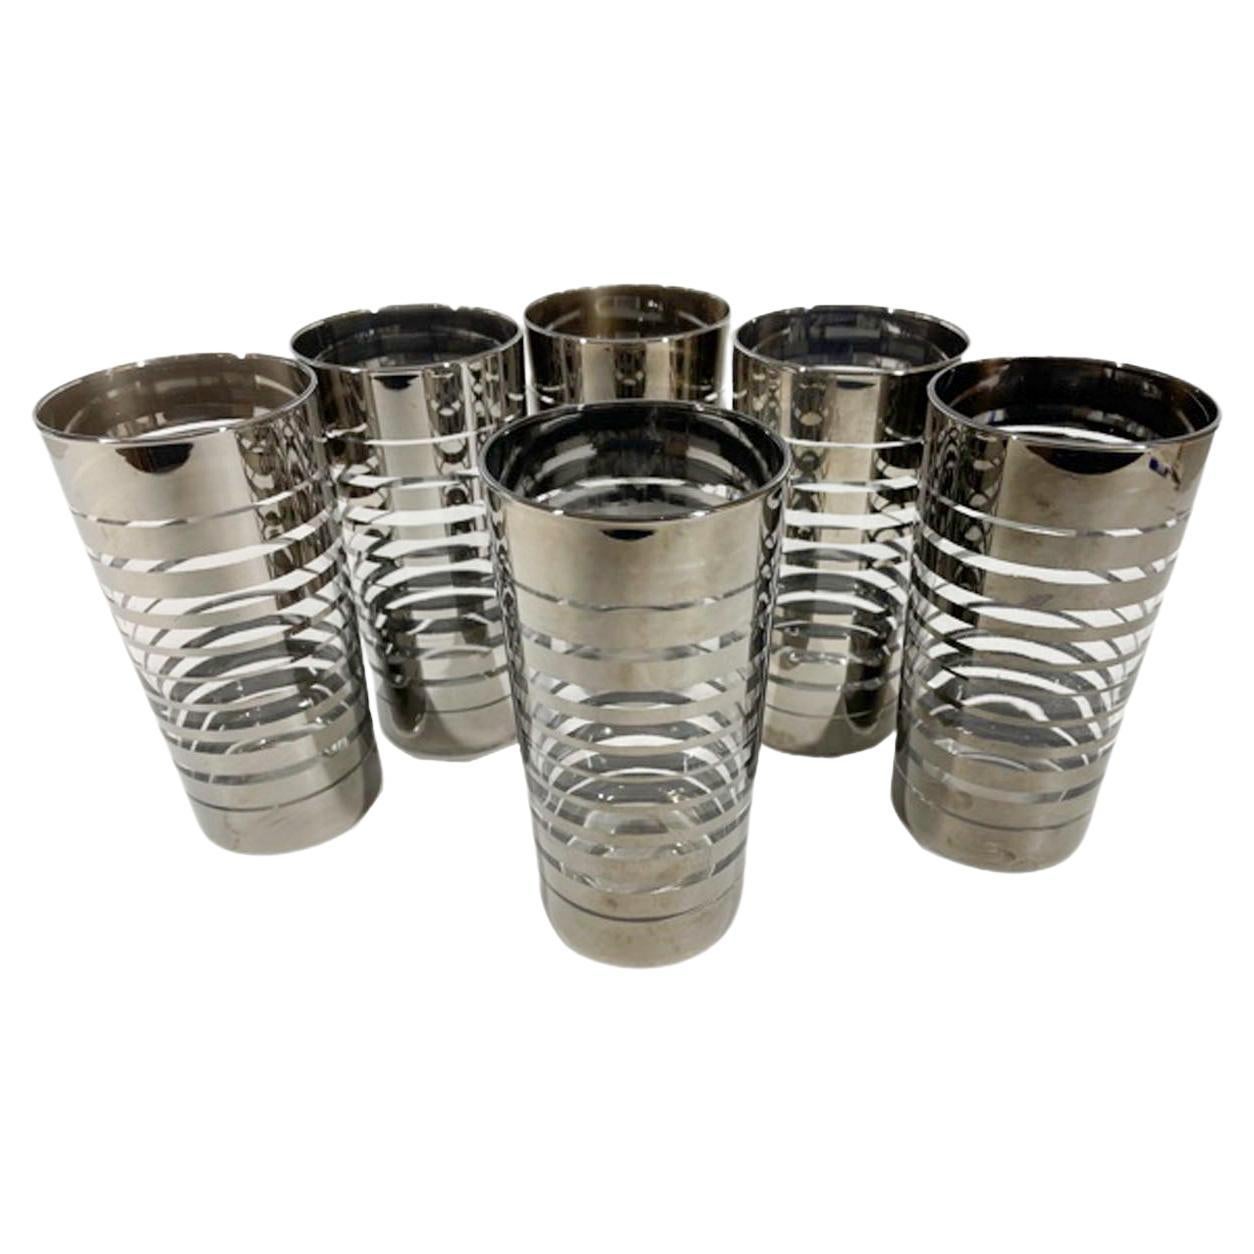 6 Vintage Mid-Century Modern Highball Glasses with Graduated Silver Bands